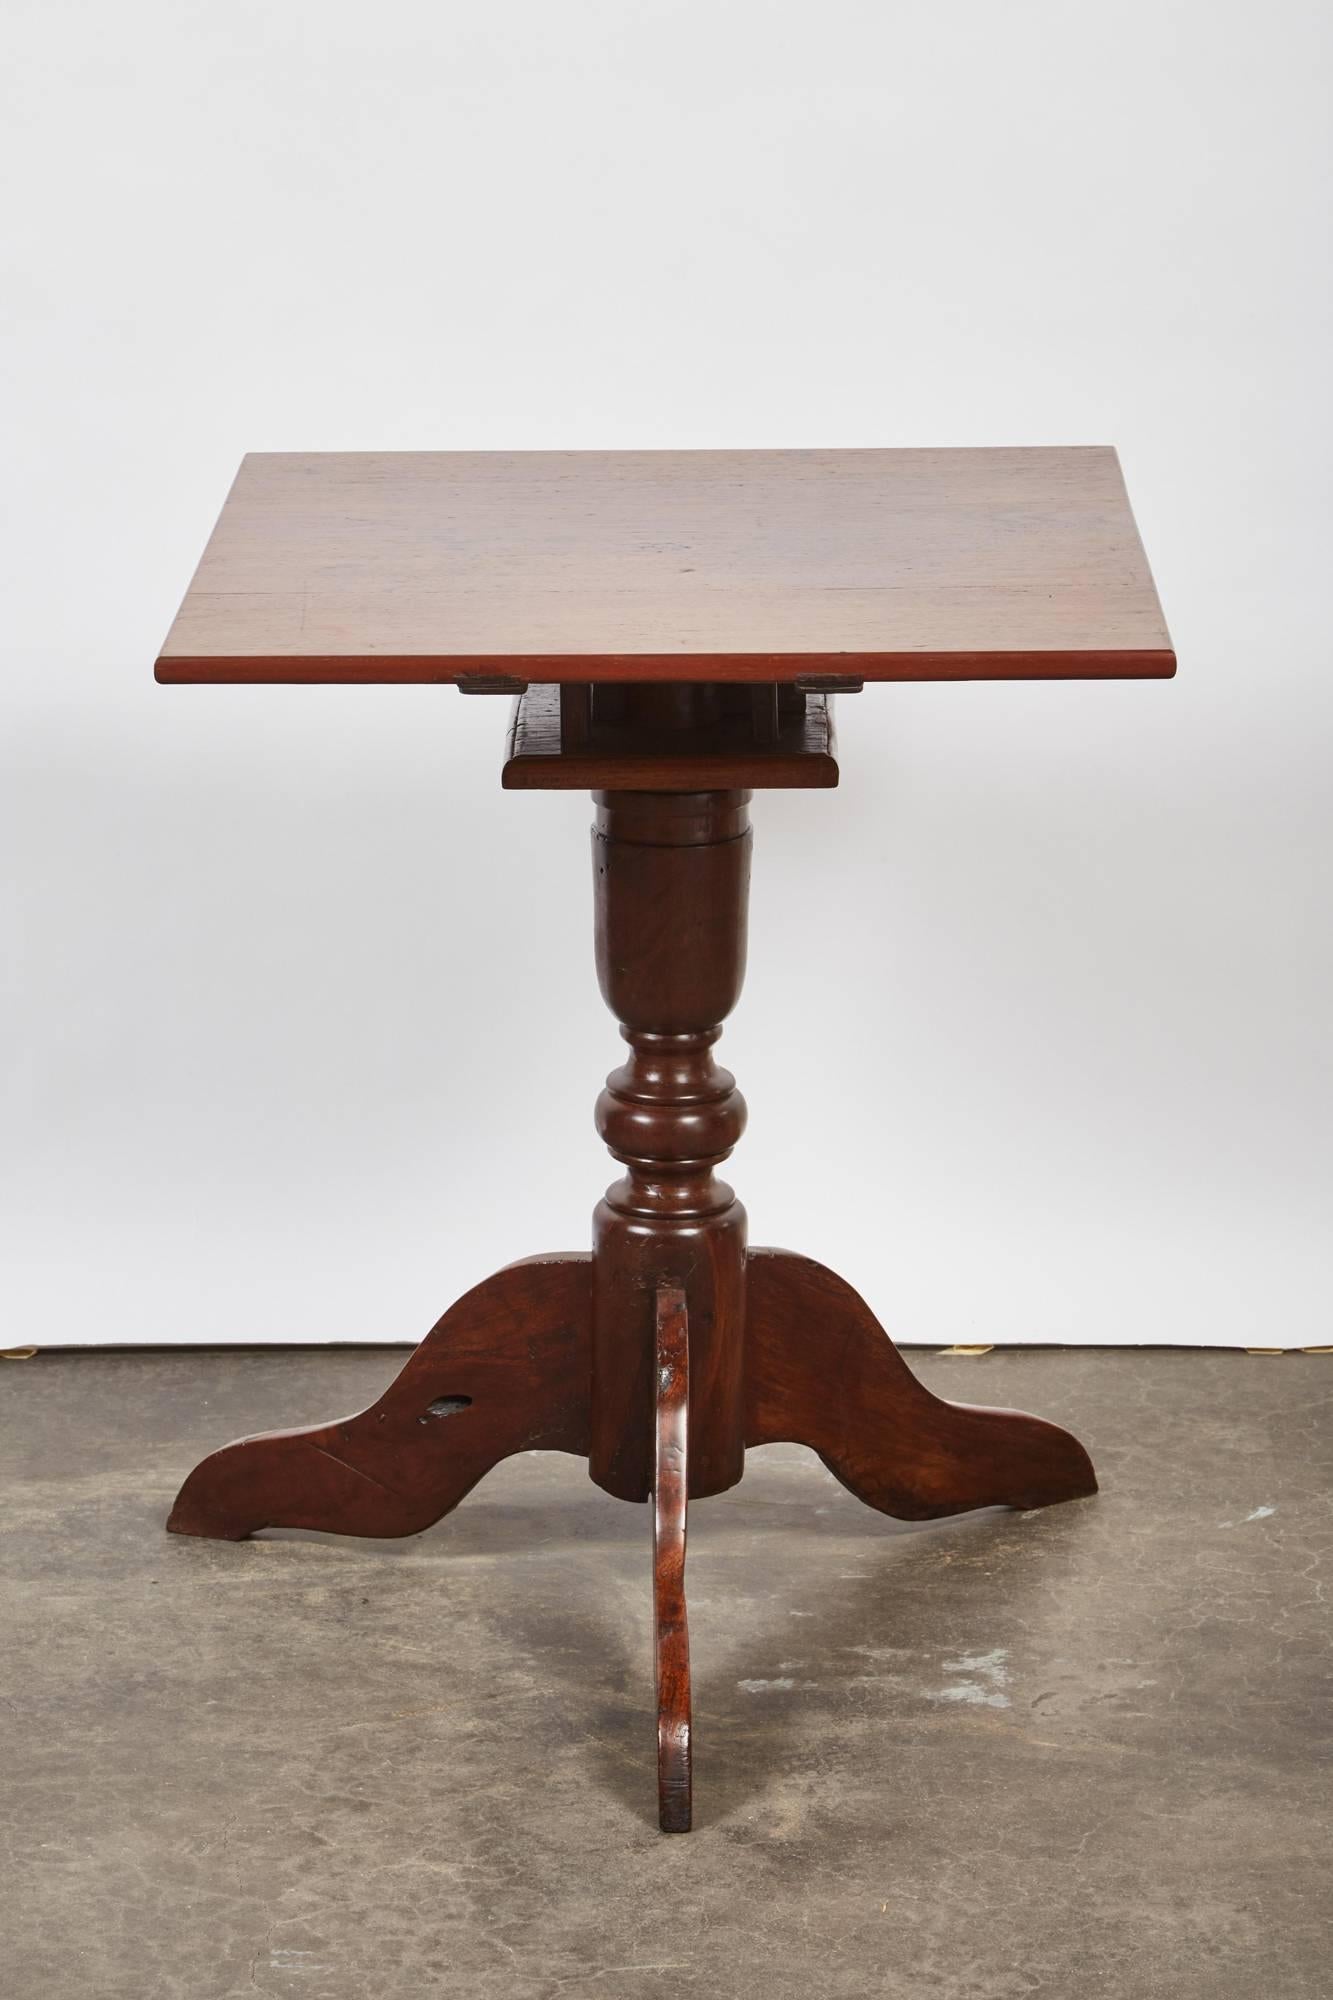 This mid-19th century tindalo wood square top pedestal table feature three snake legs with a square top.